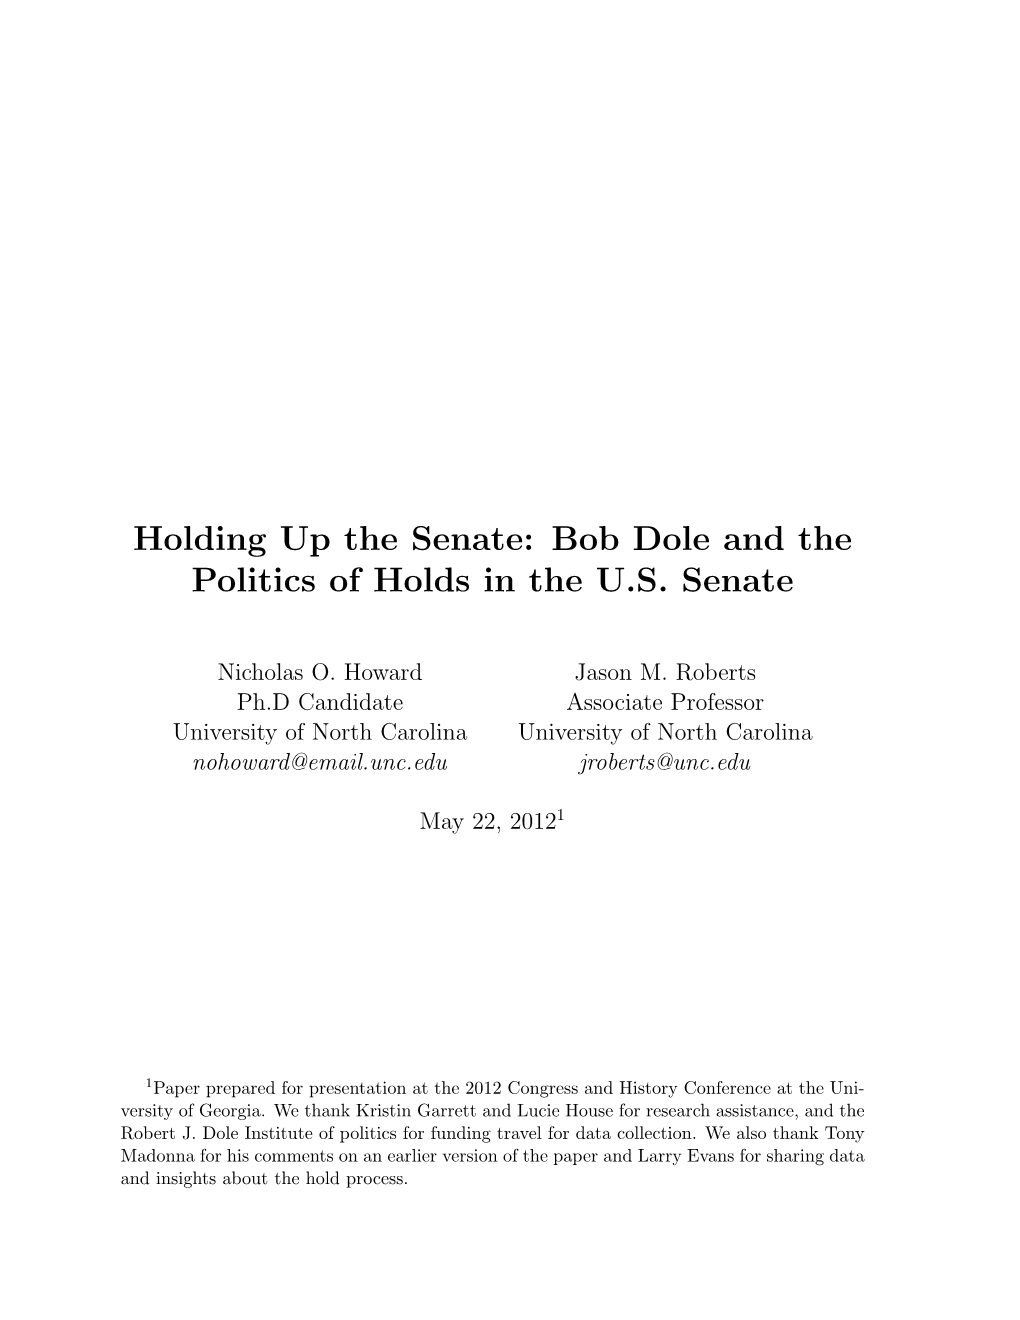 Bob Dole and the Politics of Holds in the US Senate